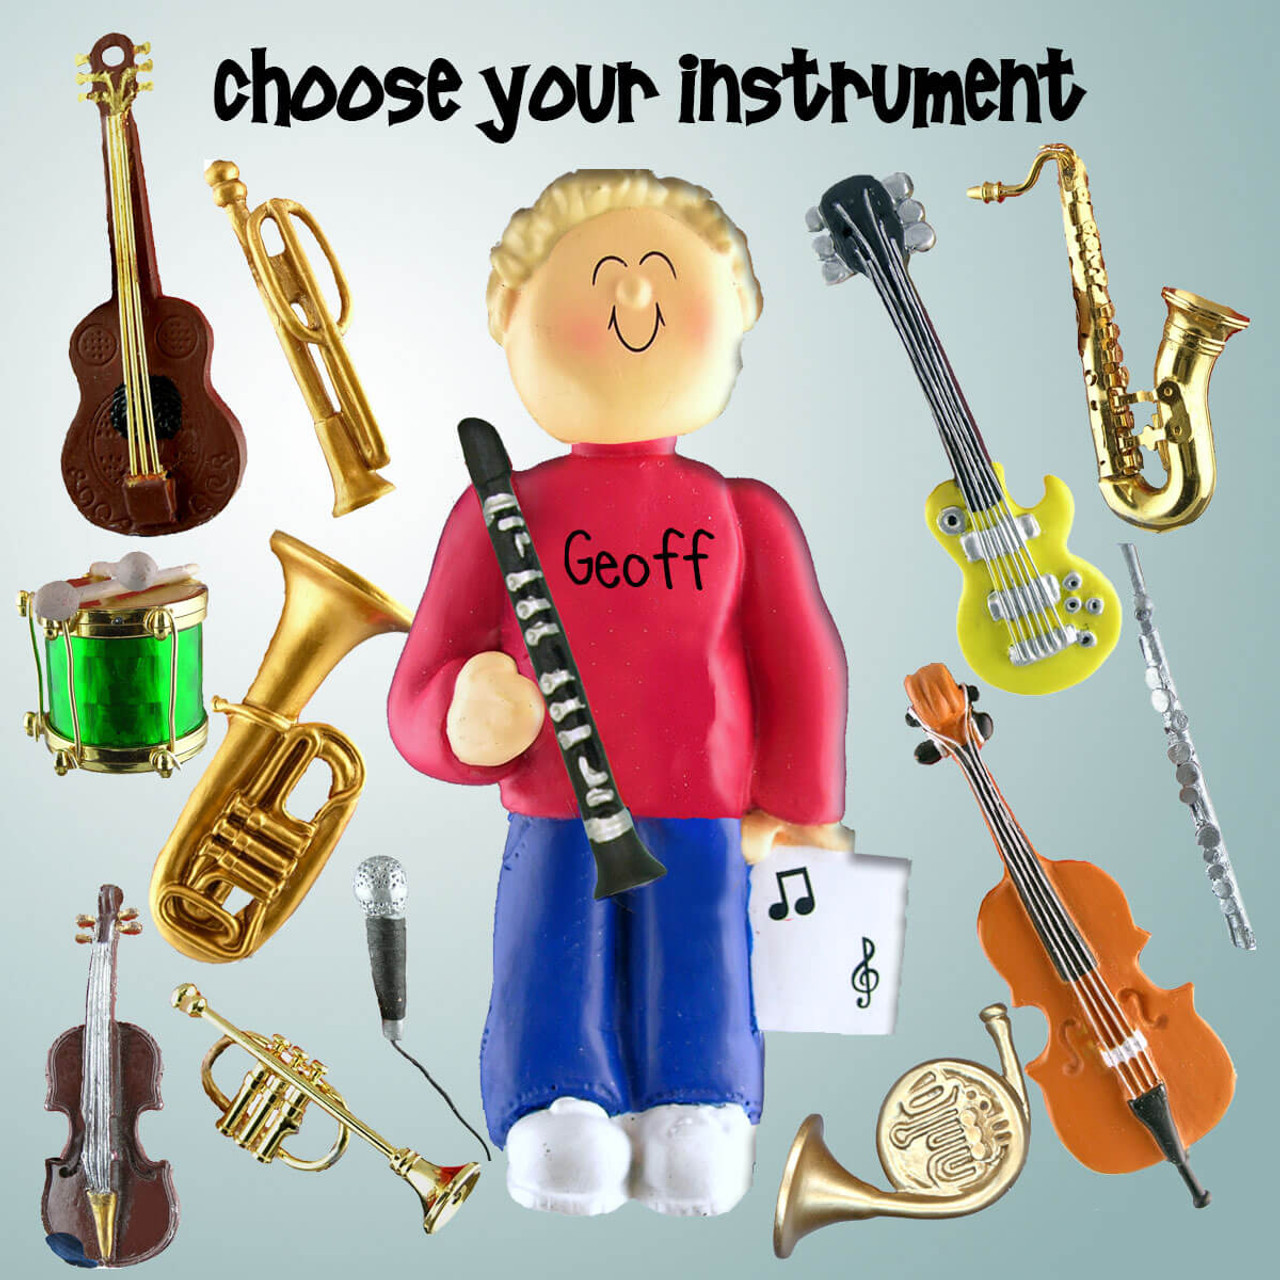 Choose Your Instrument!